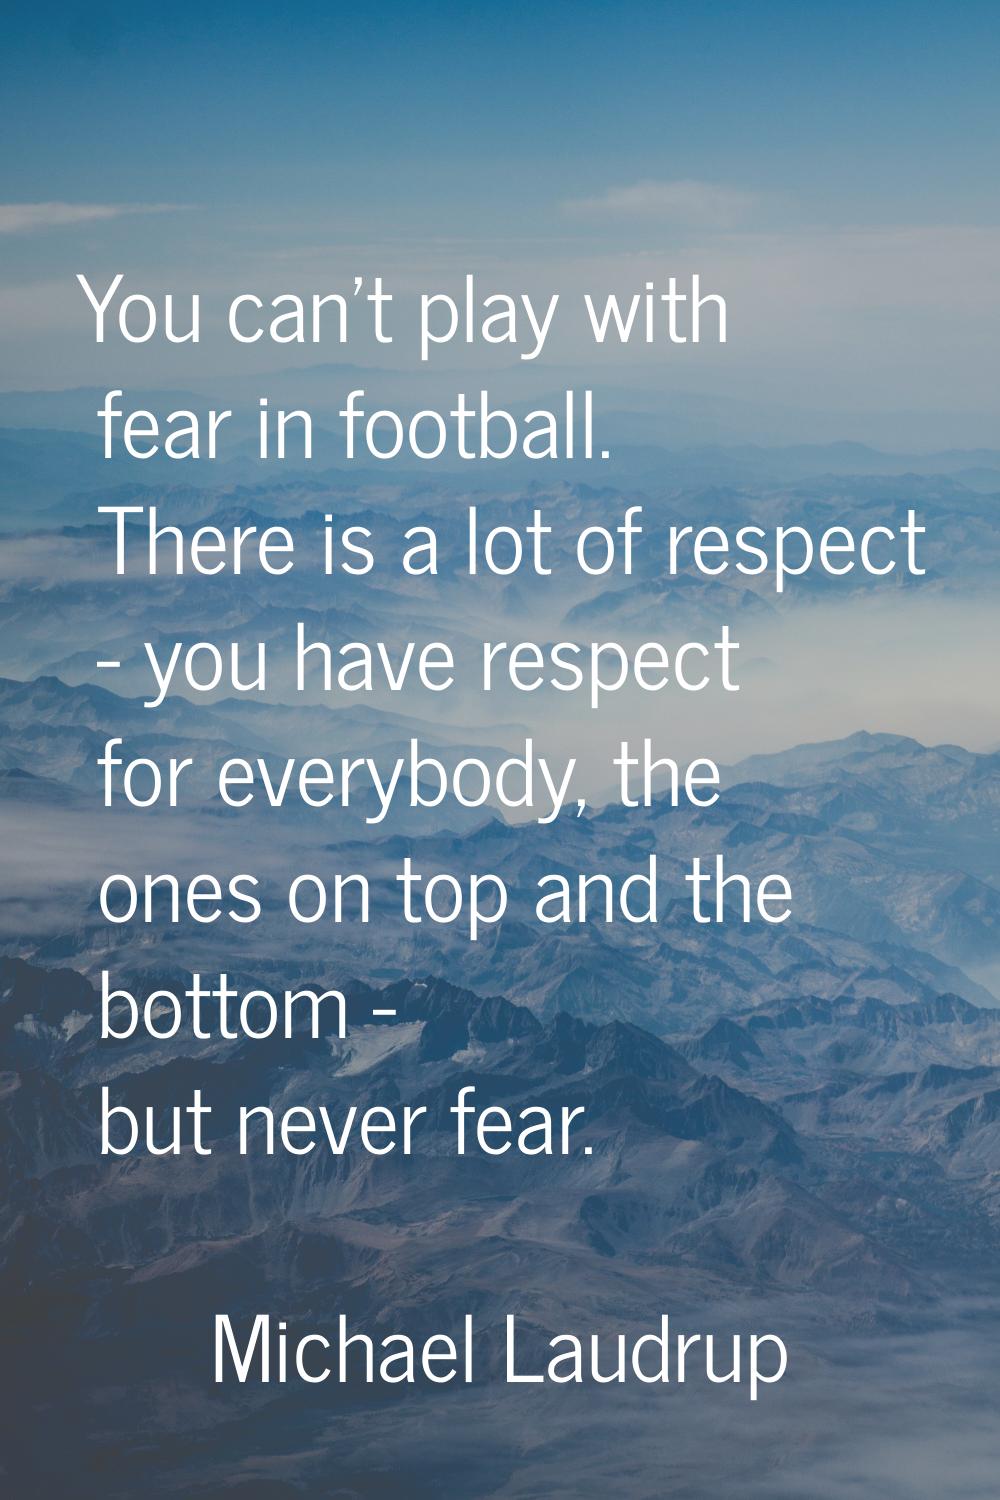 You can't play with fear in football. There is a lot of respect - you have respect for everybody, t